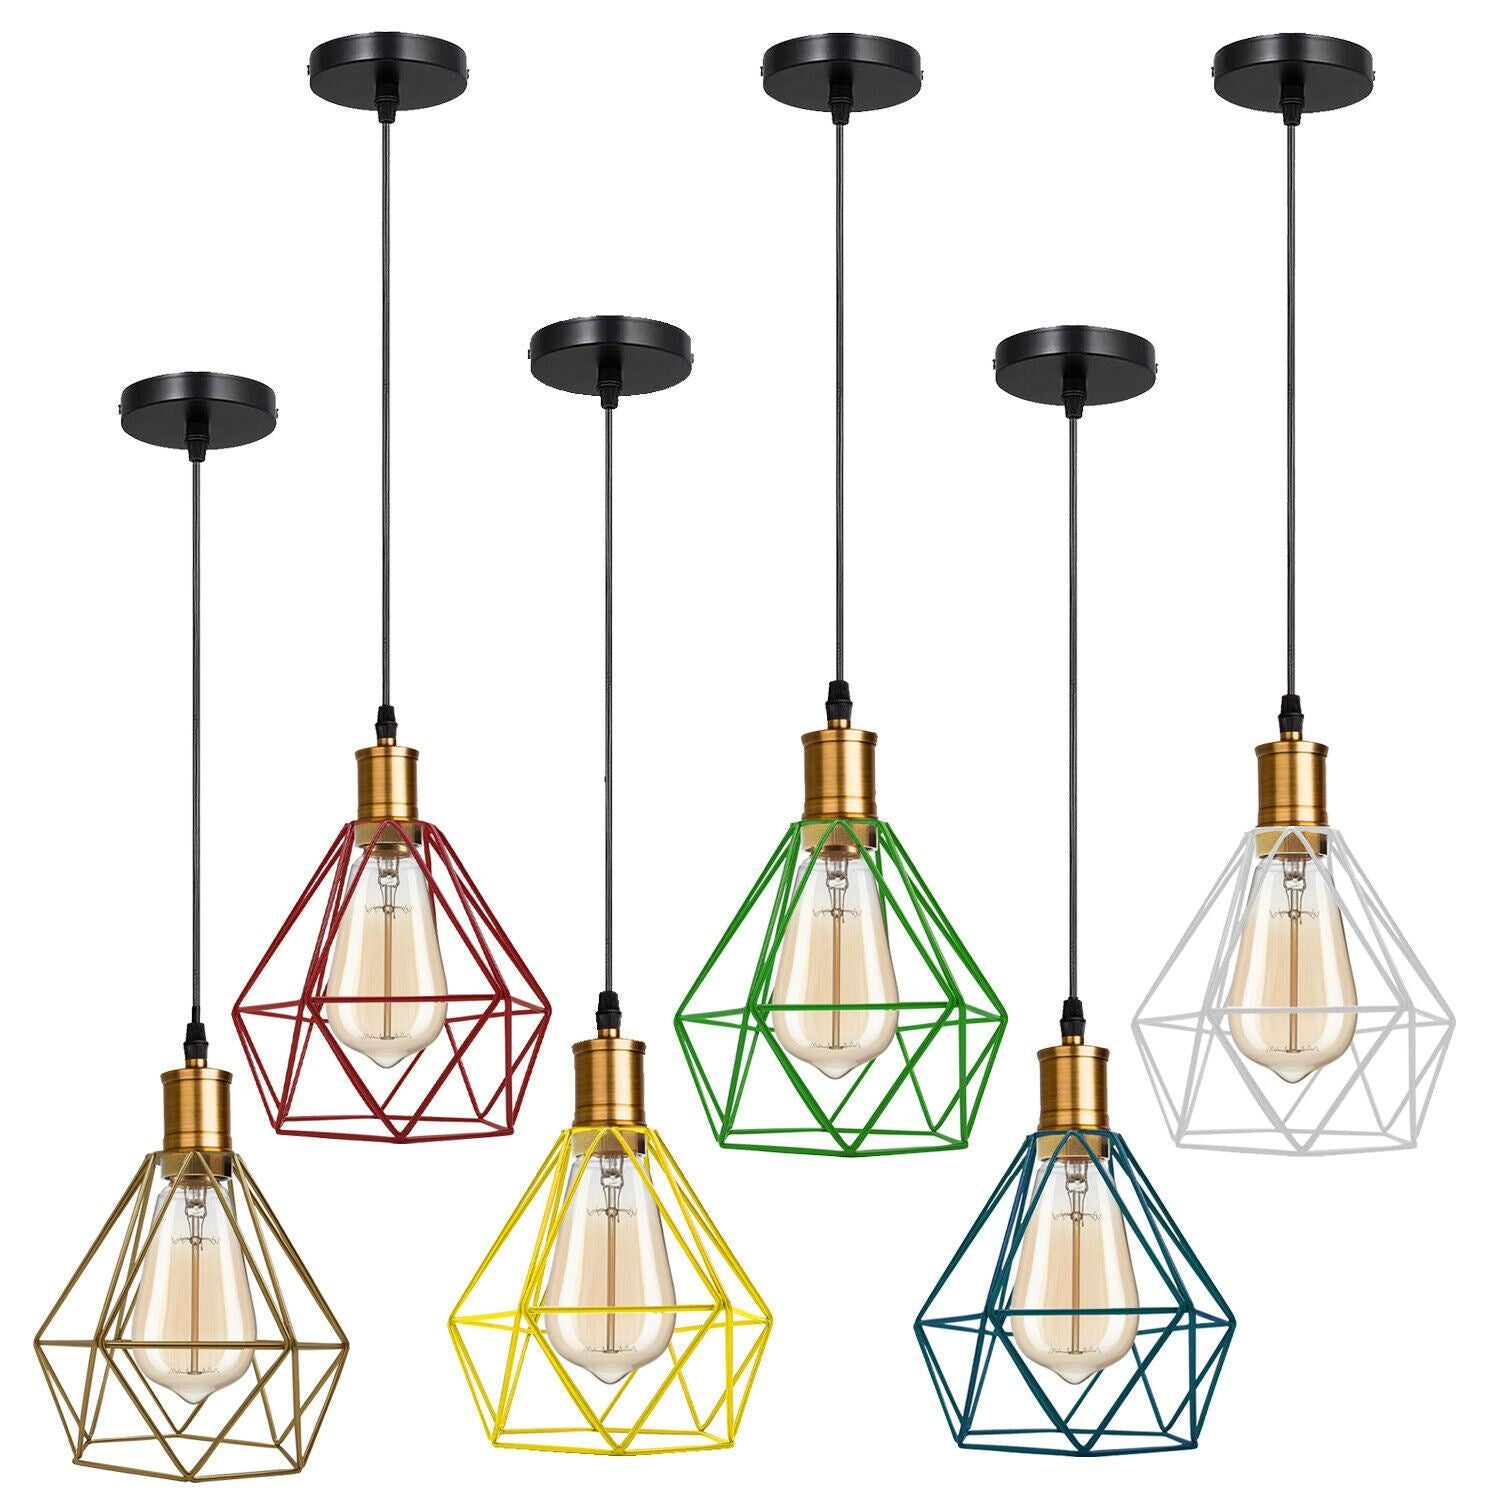 2Pack Diamond Cage Geometric Wire Ceiling Pendant Light Fitting